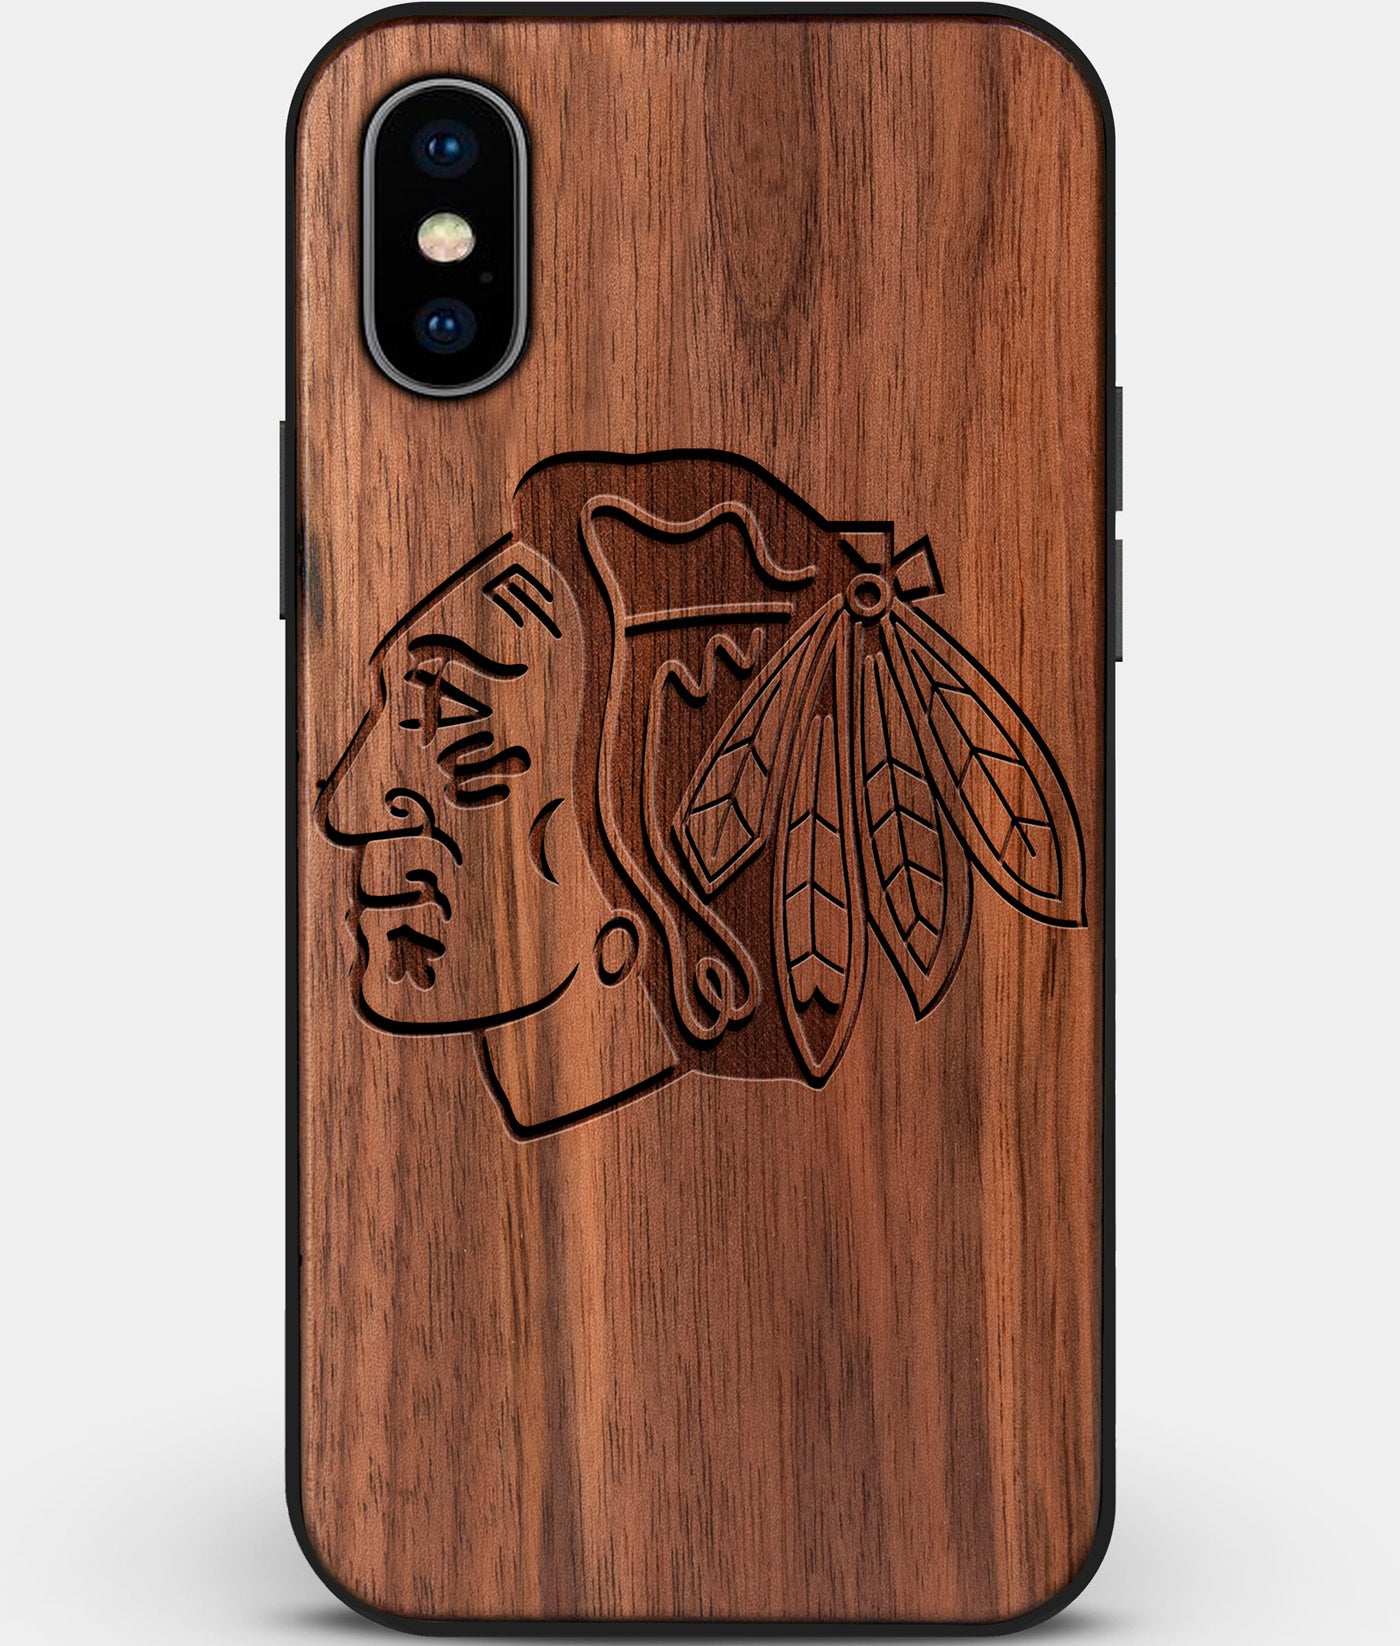 Custom Carved Wood Chicago Blackhawks iPhone X/XS Case | Personalized Walnut Wood Chicago Blackhawks Cover, Birthday Gift, Gifts For Him, Monogrammed Gift For Fan | by Engraved In Nature